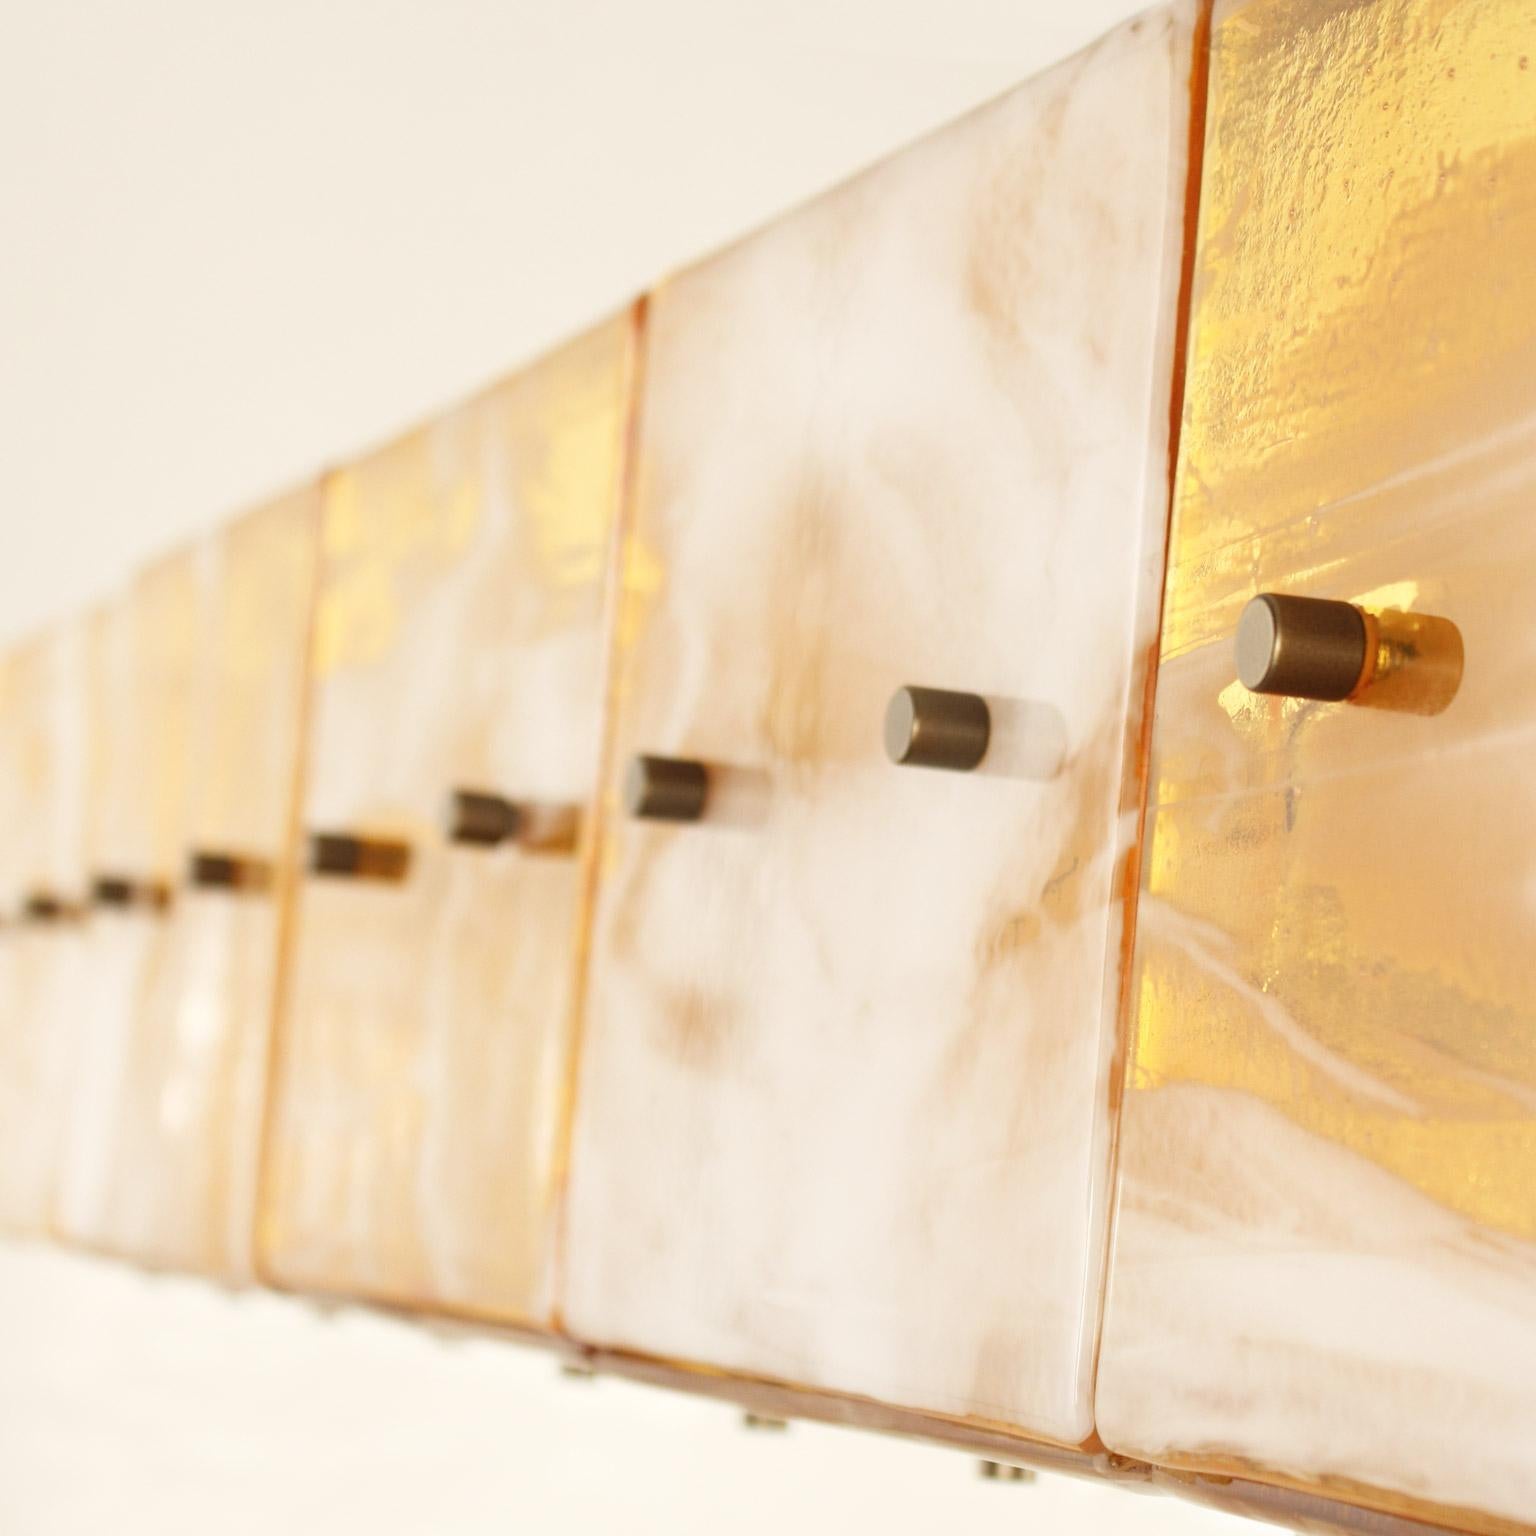 Hanging Lamp amber Murano glass Plates, Brushed Nickel frame by Multiforme In New Condition For Sale In Trebaseleghe, IT